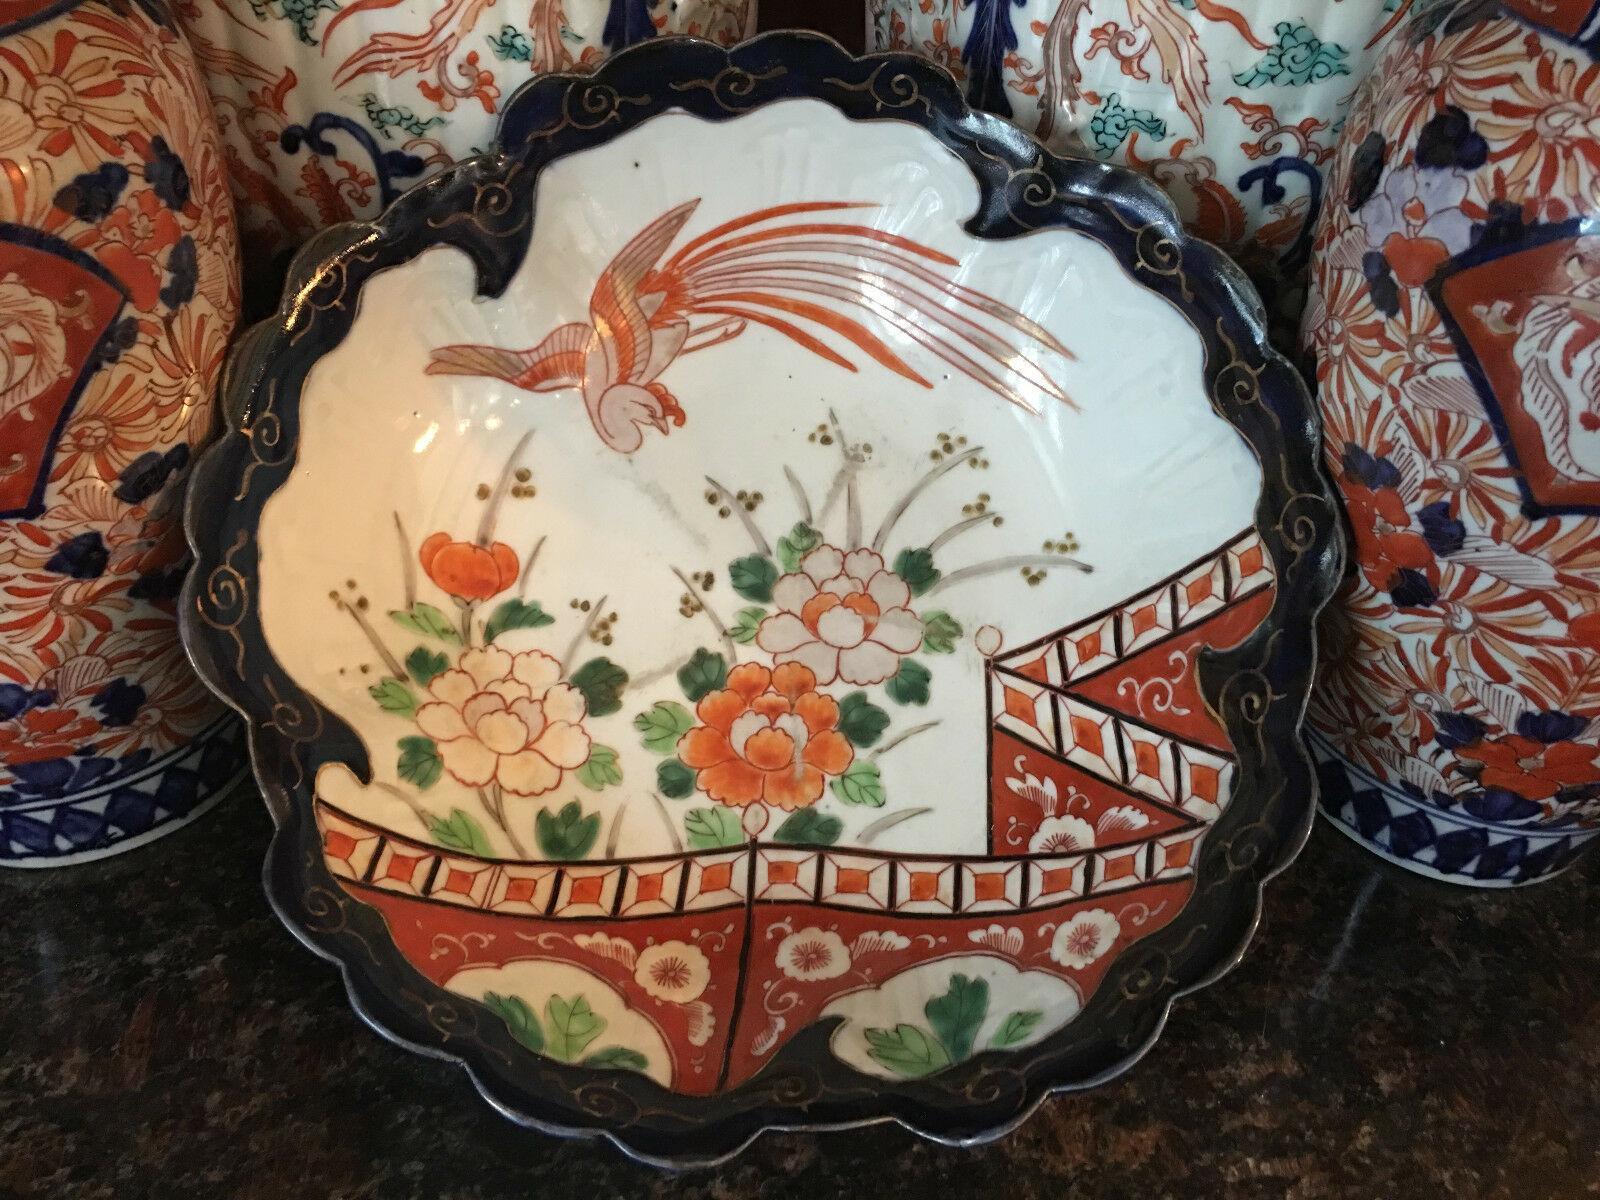 ~Direct from England~
~A beautifully hand painted antique Imari bowl, large size with stunning details!~
~Deep blue painted scalloped edge with gold gilt accents. Large flying bird above the blooming flowers~
~ Traditional red, orange-red and deep